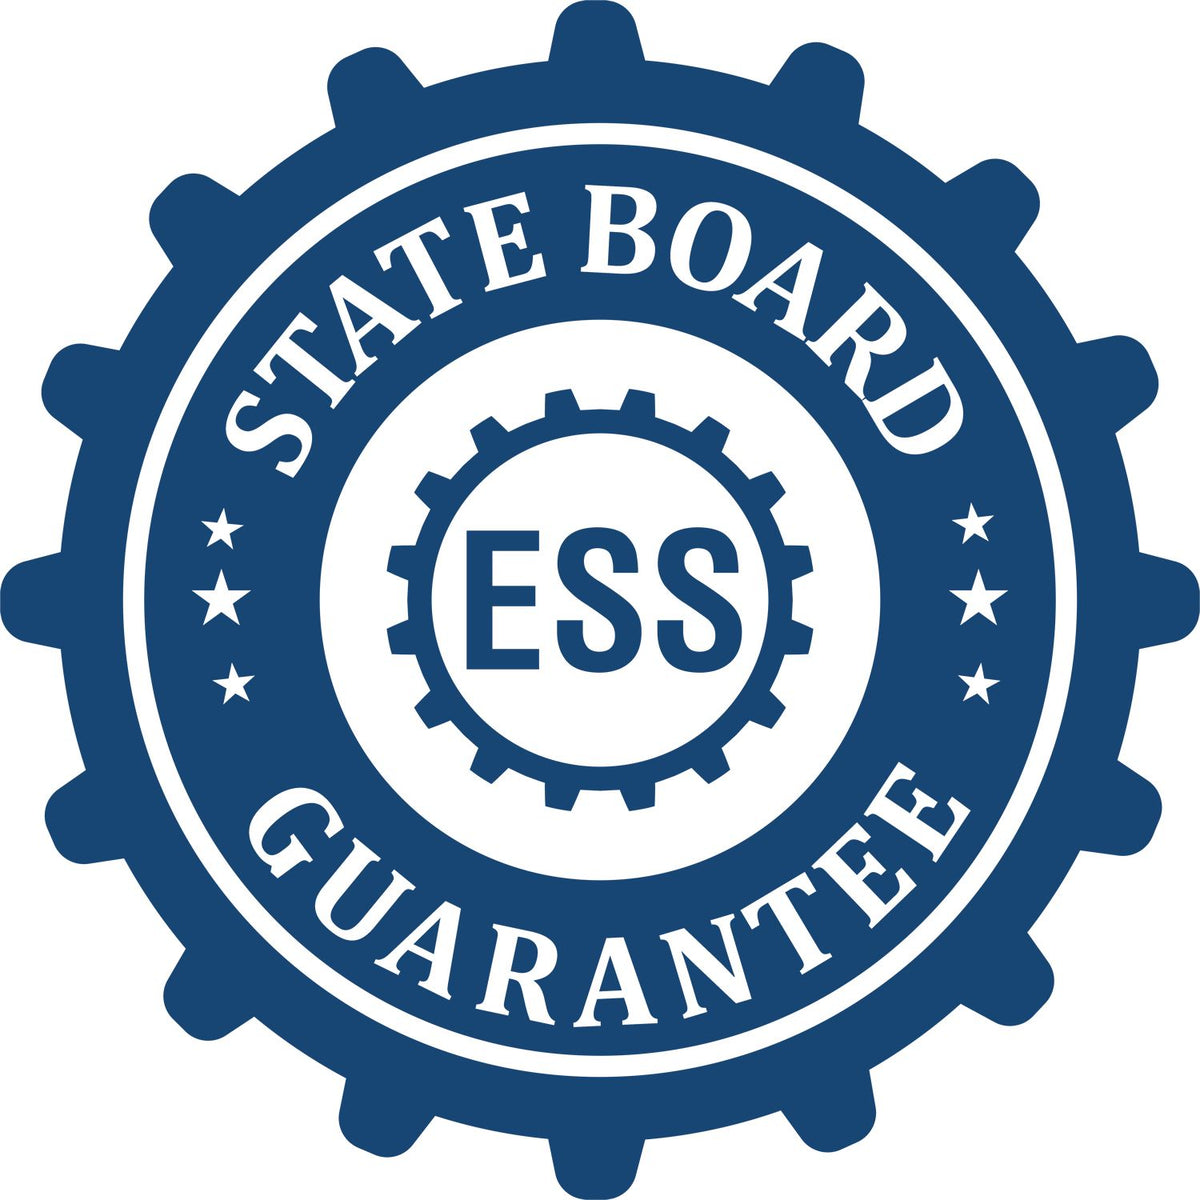 An emblem in a gear shape illustrating a state board guarantee for the Premium MaxLight Pre-Inked Arizona Engineering Stamp product.